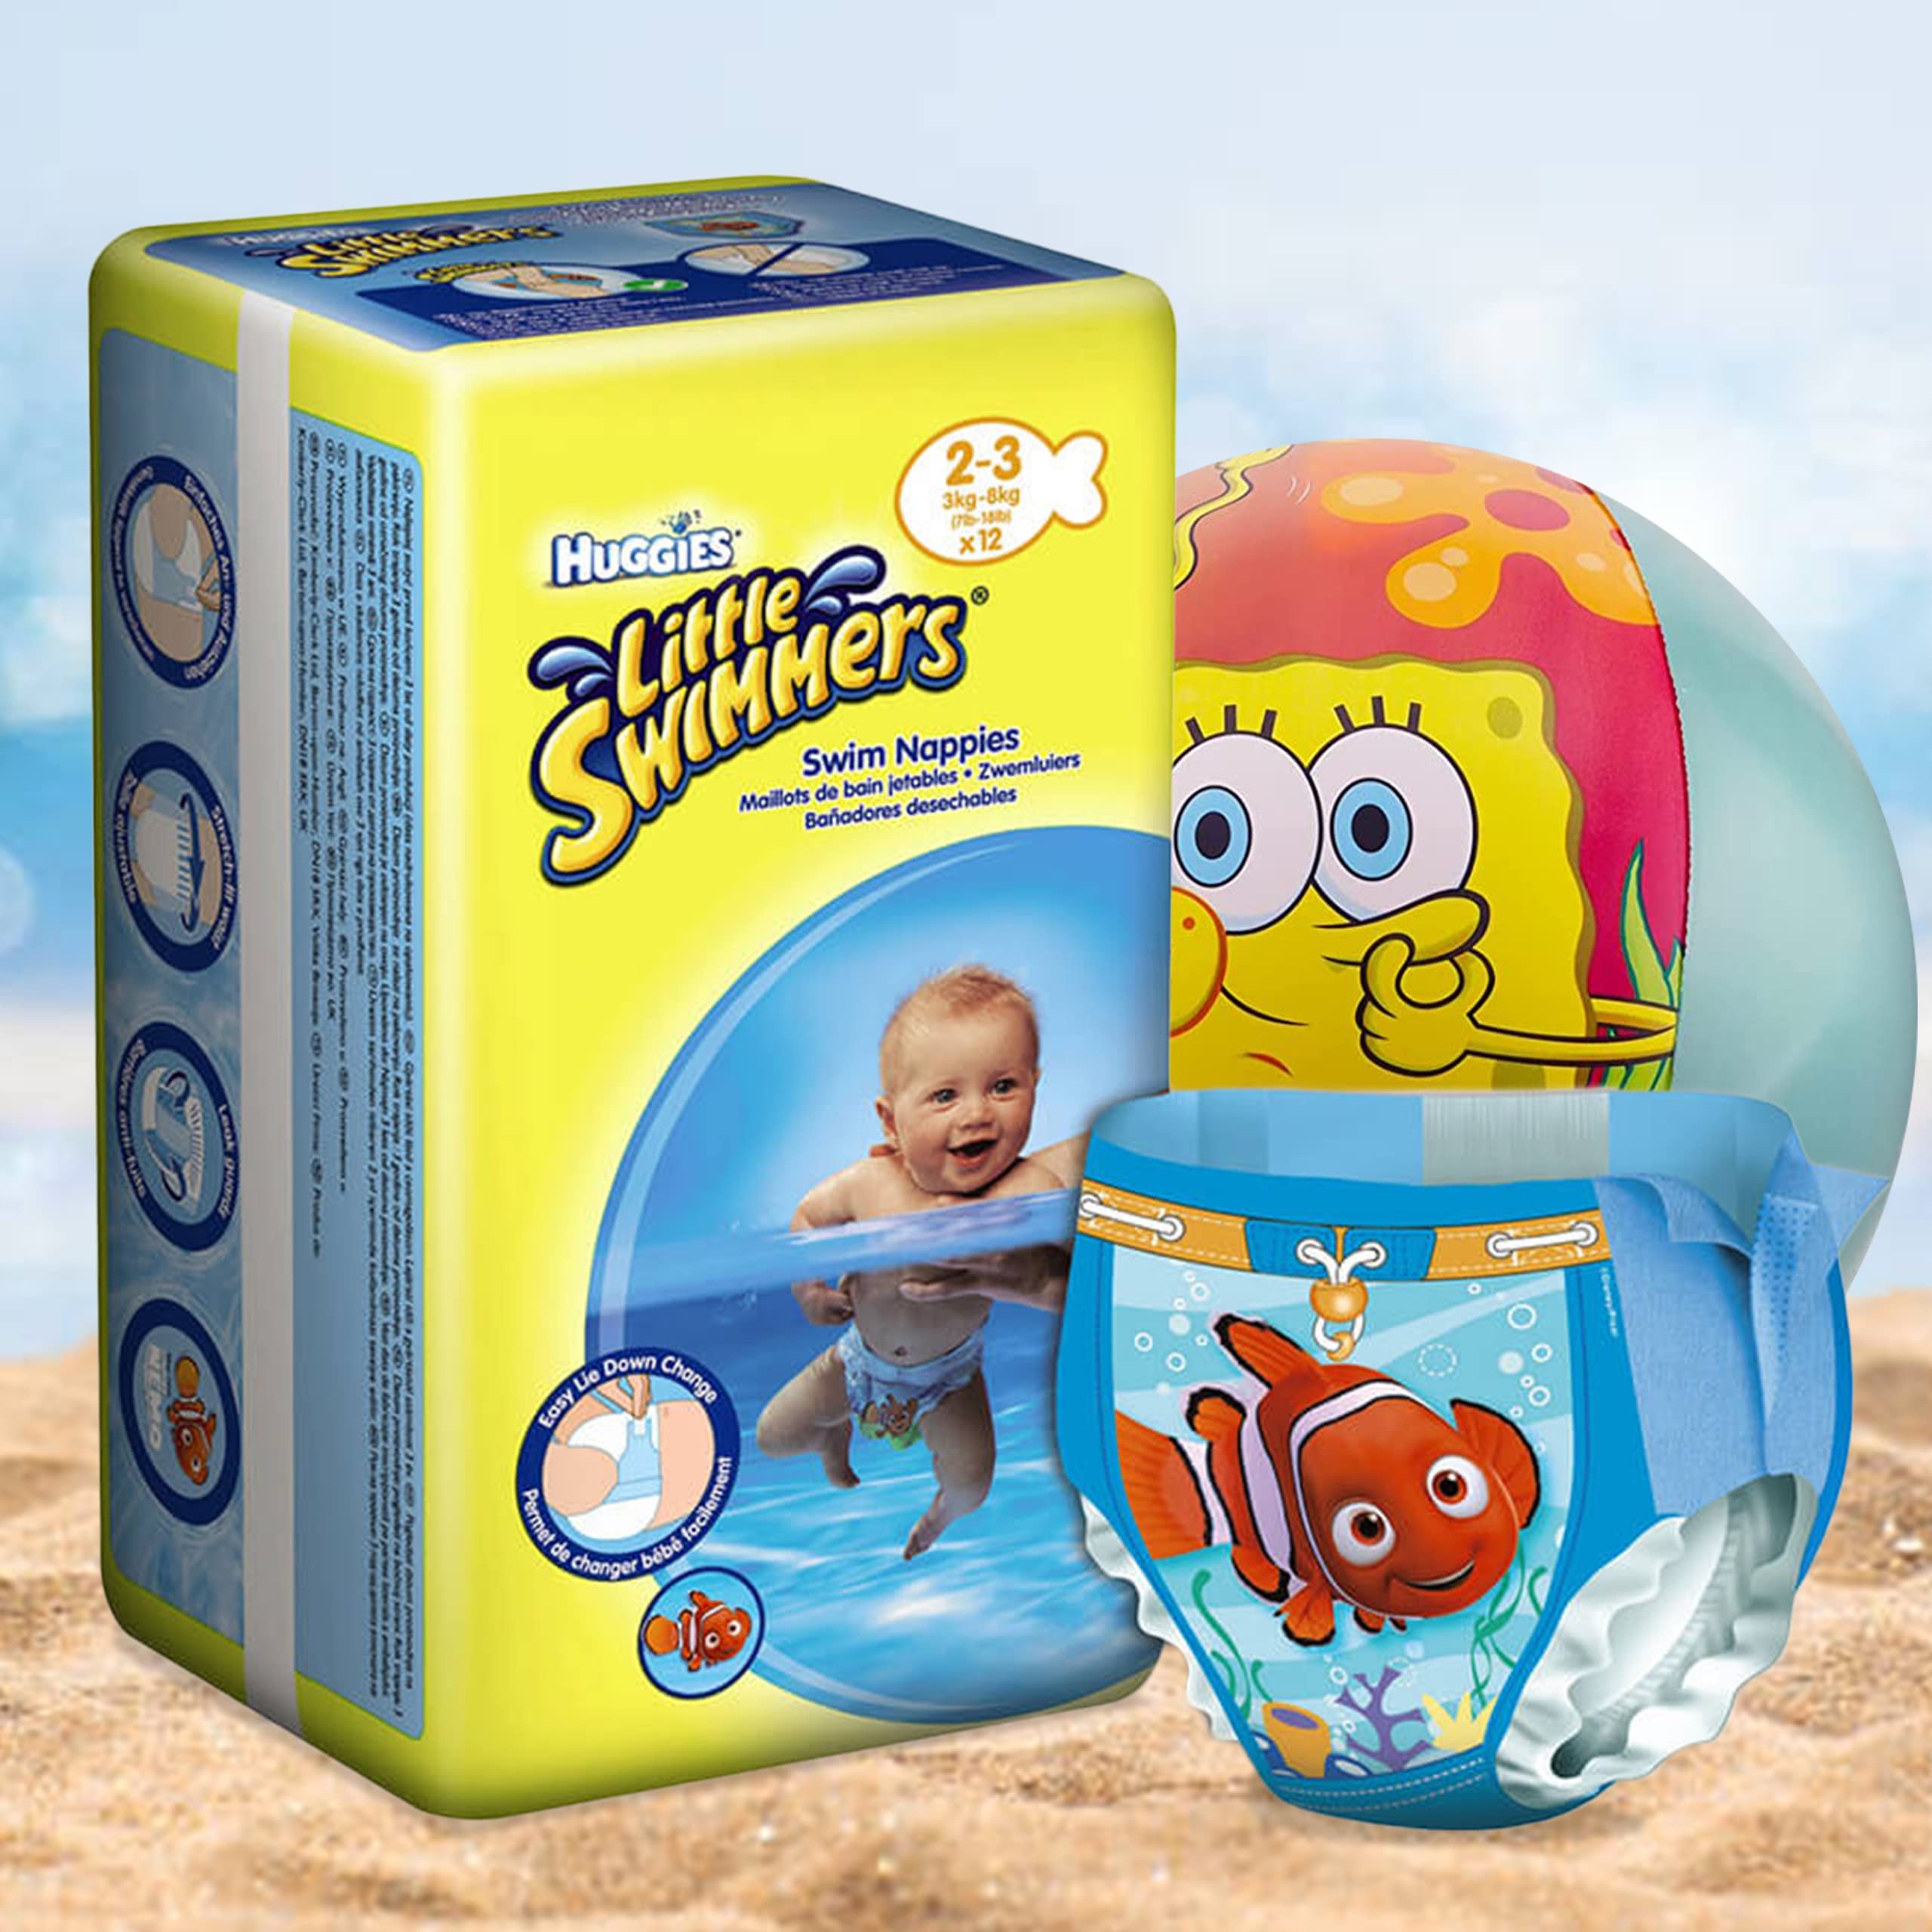 Little Swimmers Disposable Swim Diapers, Size X-Small 2-3 (7lb-18lb.) Absorbent and Adjustable Swim Nappies for Baby, Toddler, Girls, Boys, 12 Swimming Pants Plus Bonus Spongebob Beach Ball